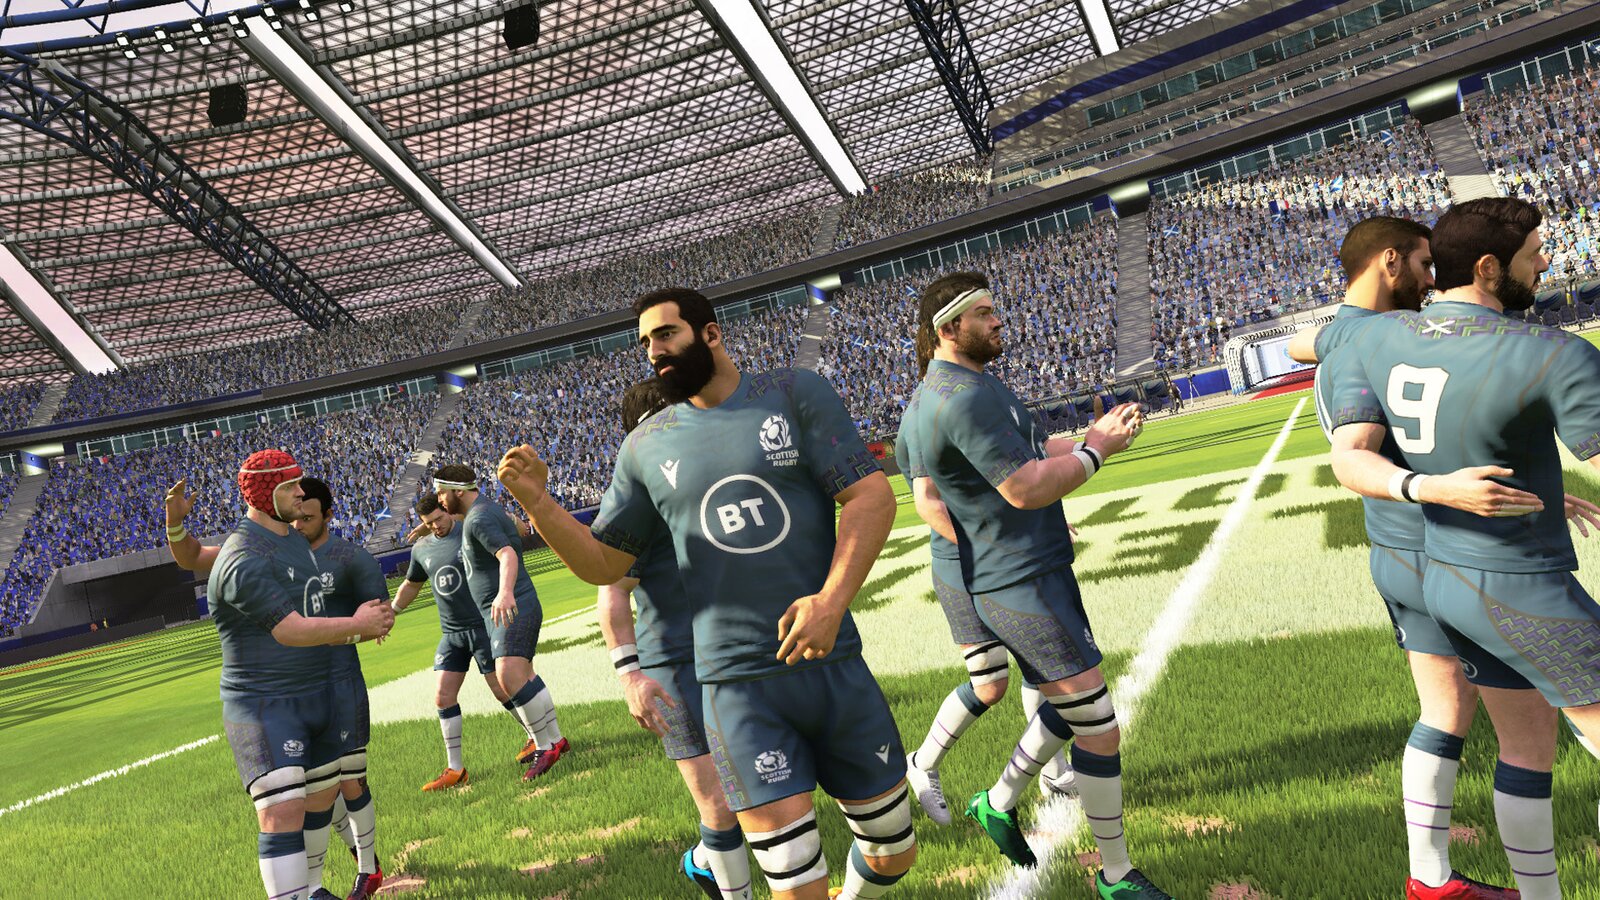 Rugby 20